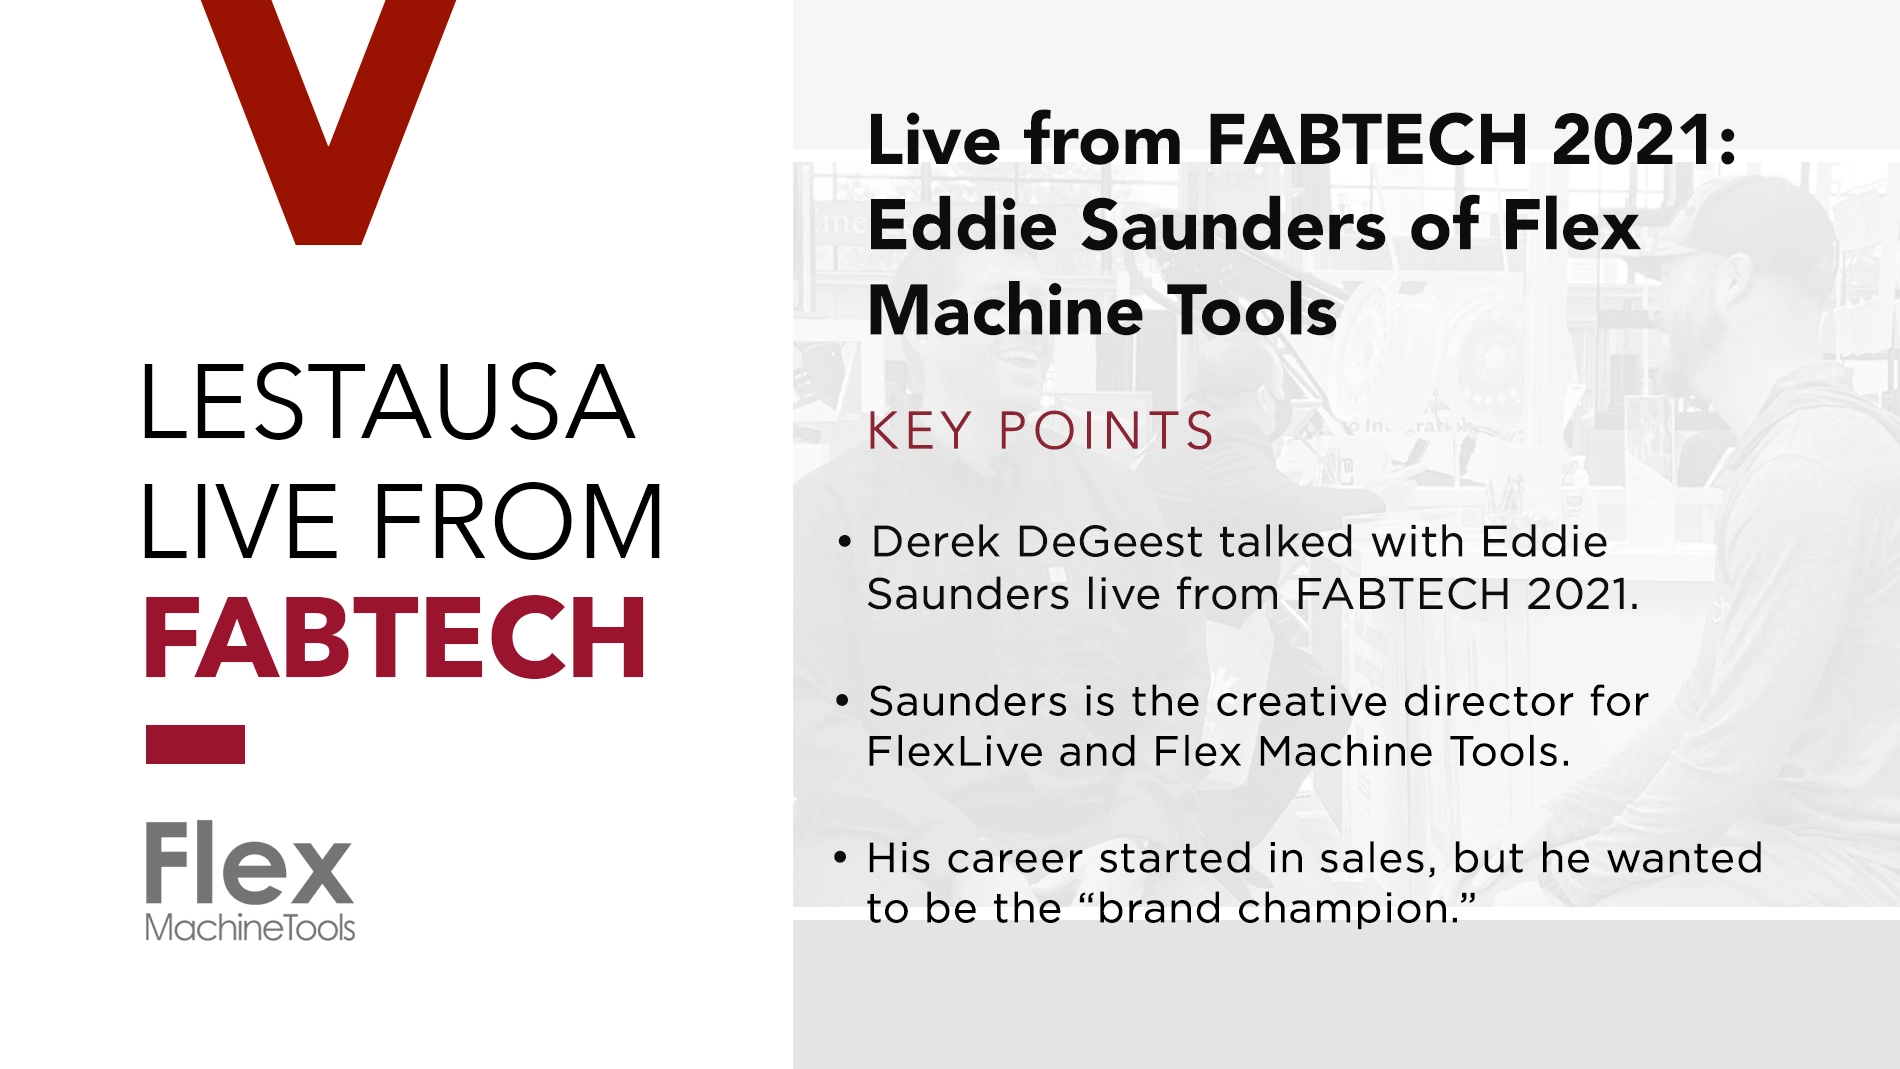 Live from FABTECH 2021: Eddie Saunders of Flex Machine Tools